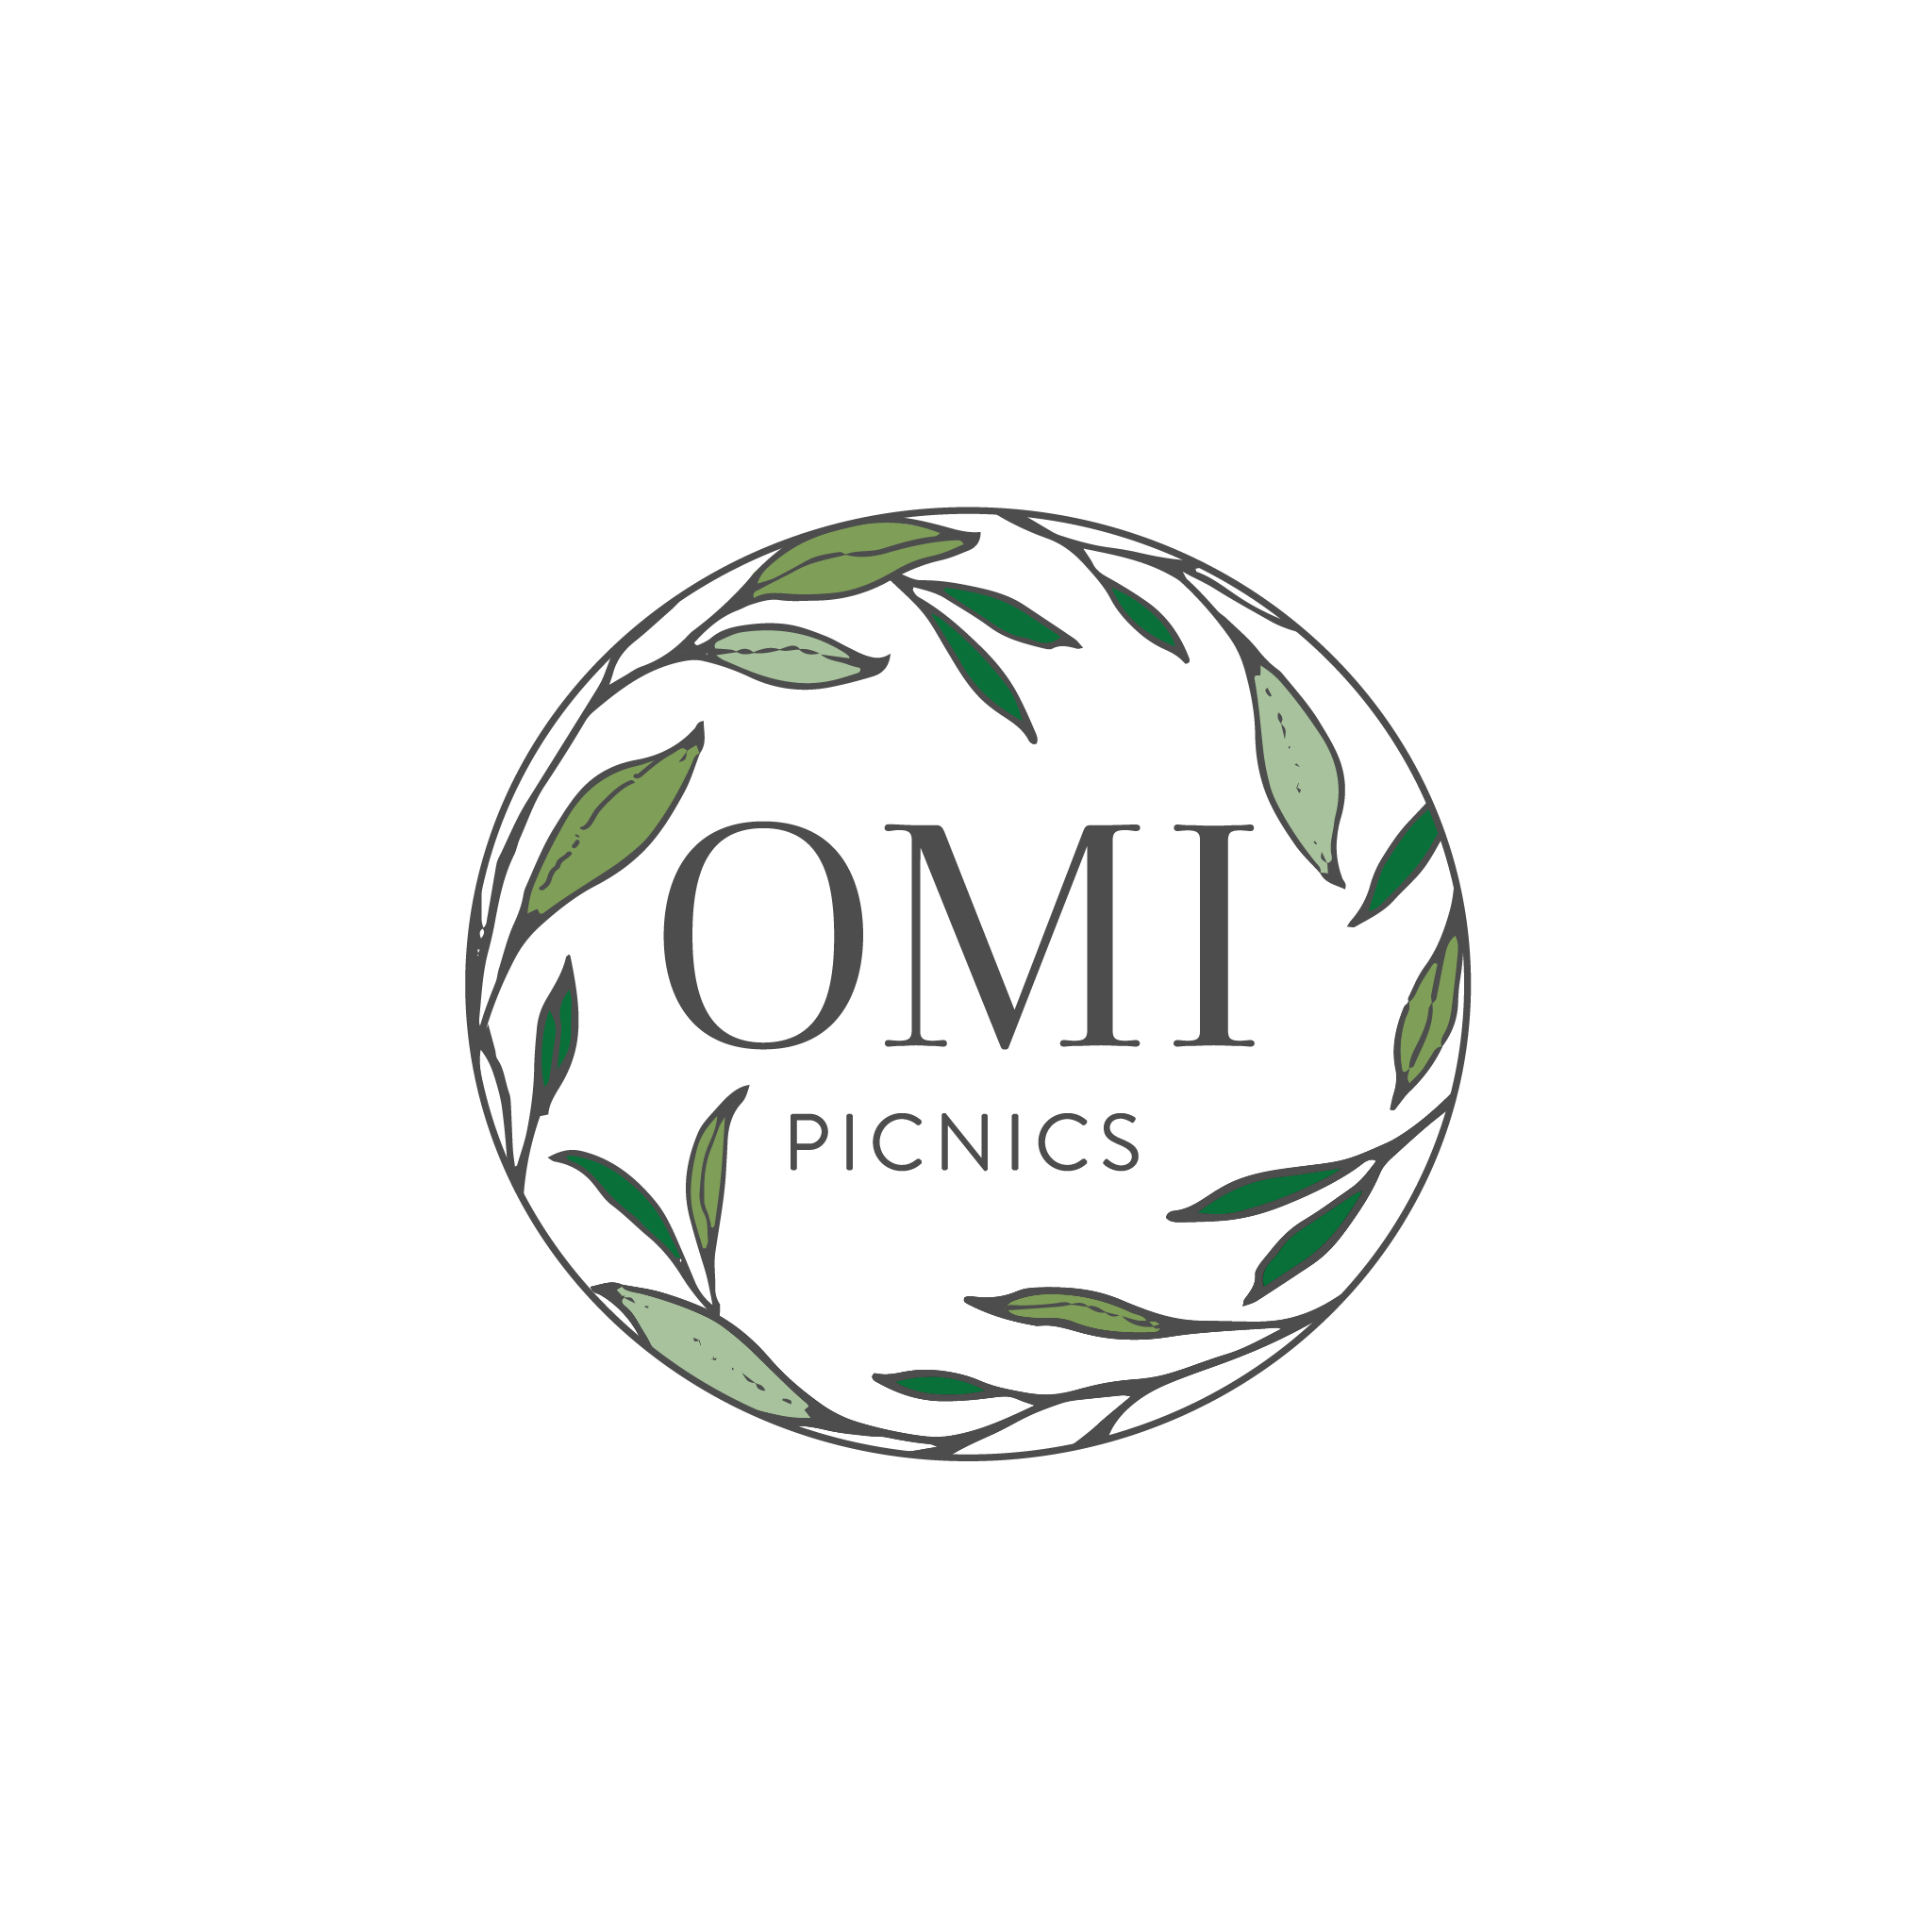 Omi Picnics Expands Services to Temecula, CA Under New Ownership